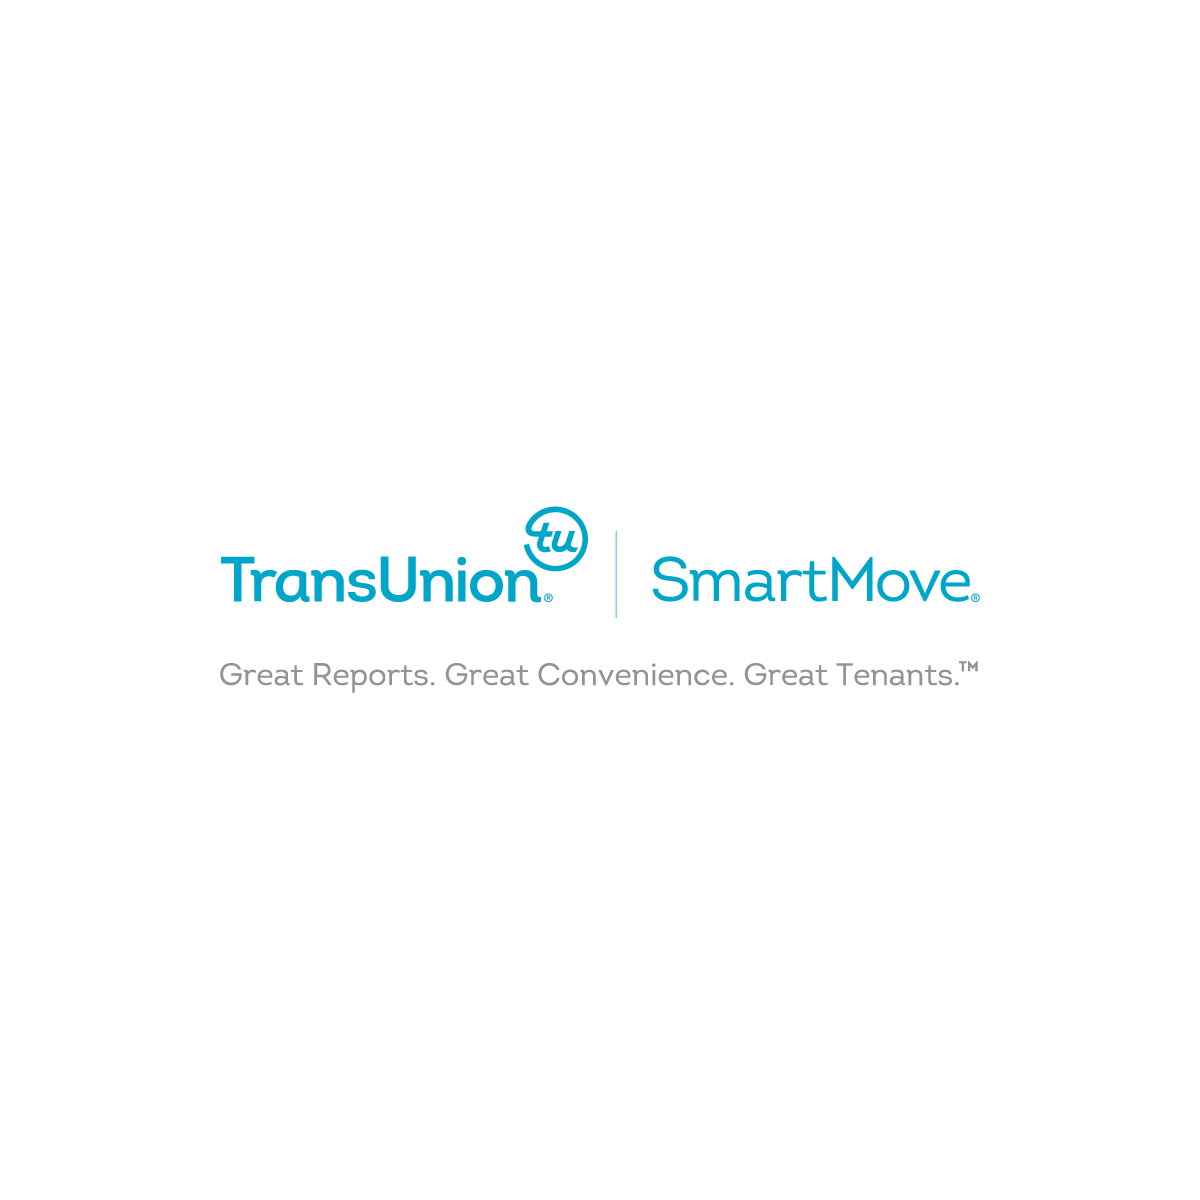 SmartMove Promo Code For 25 Off Your Next Screening